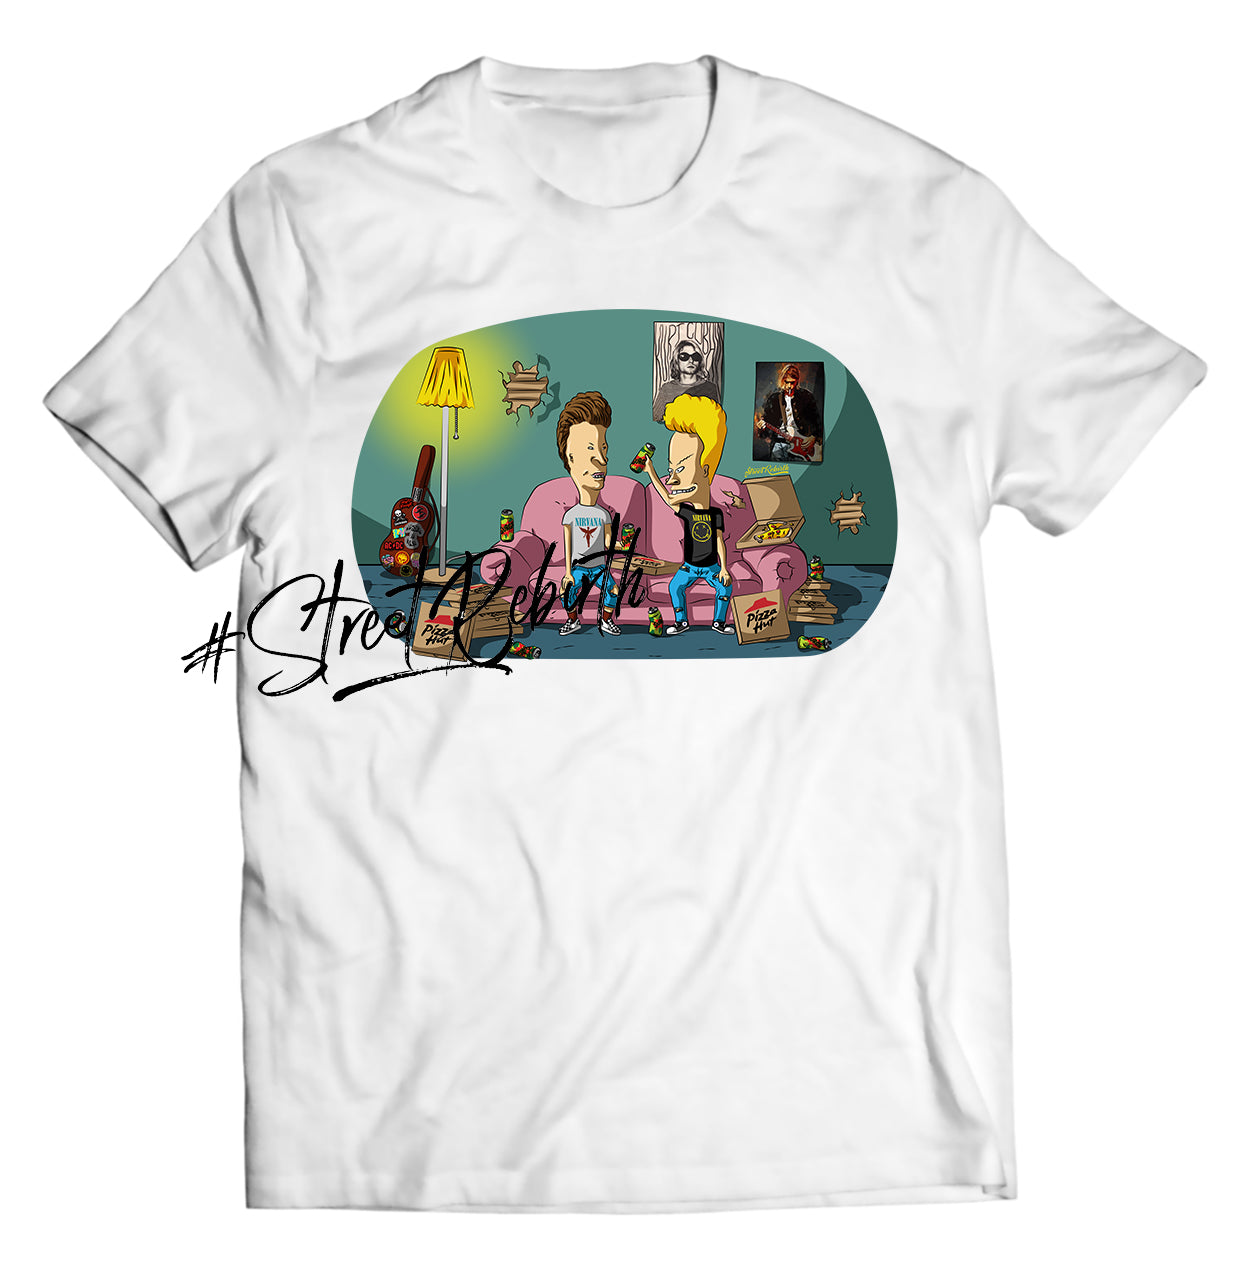 Beavis Butthead Shirt - Direct To Garment Quality Print - Unisex Shirt - Gift For Him or Her